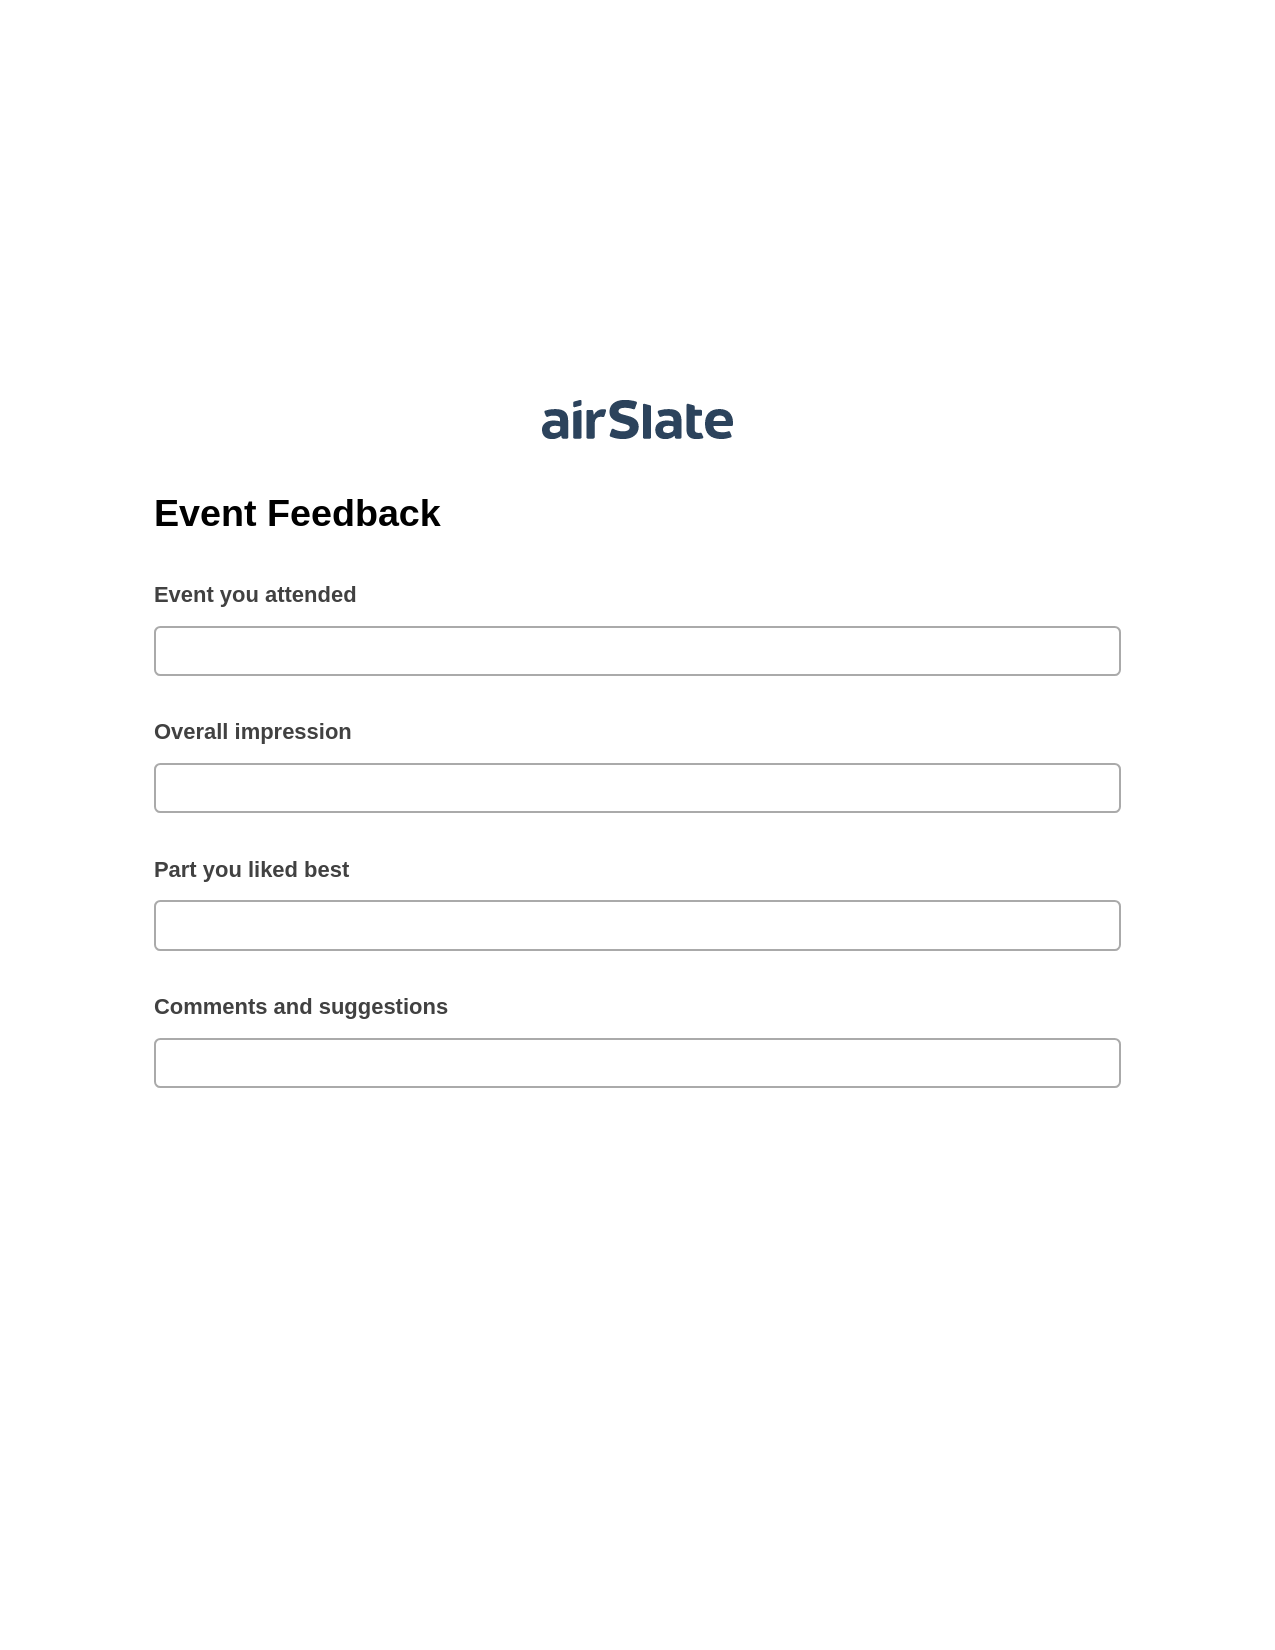 Event Feedback Pre-fill from Salesforce Record Bot, Add Tags to Slate Bot, Export to Smartsheet